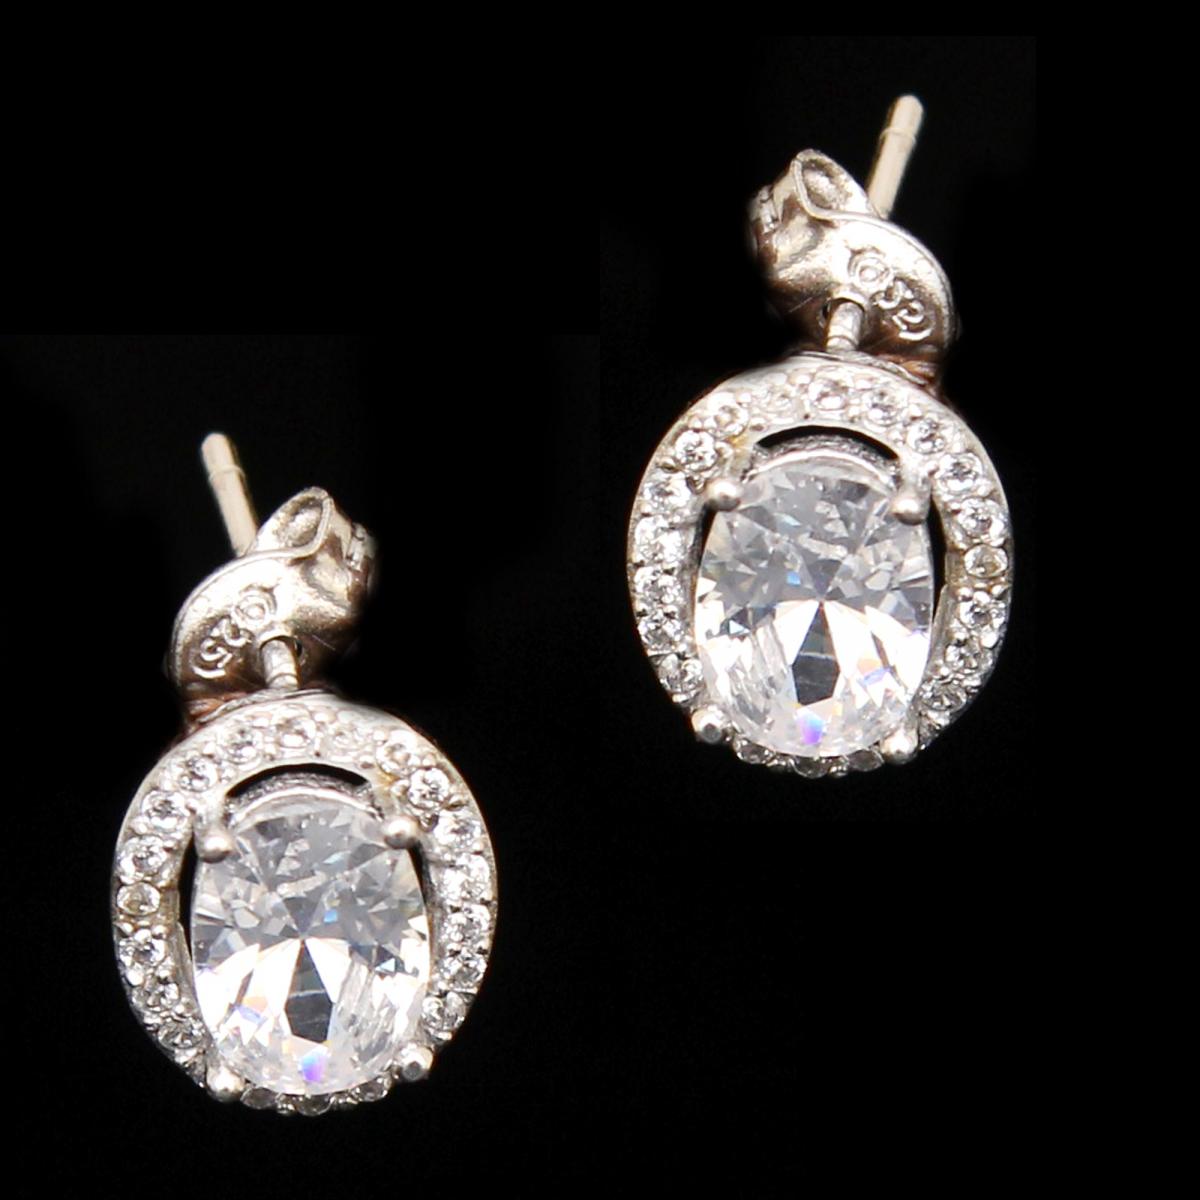 Carlton London 925 Sterling Silver CZ Studded Rhodium Plated Drop Earrings  Buy Carlton London 925 Sterling Silver CZ Studded Rhodium Plated Drop  Earrings Online at Best Price in India  Nykaa